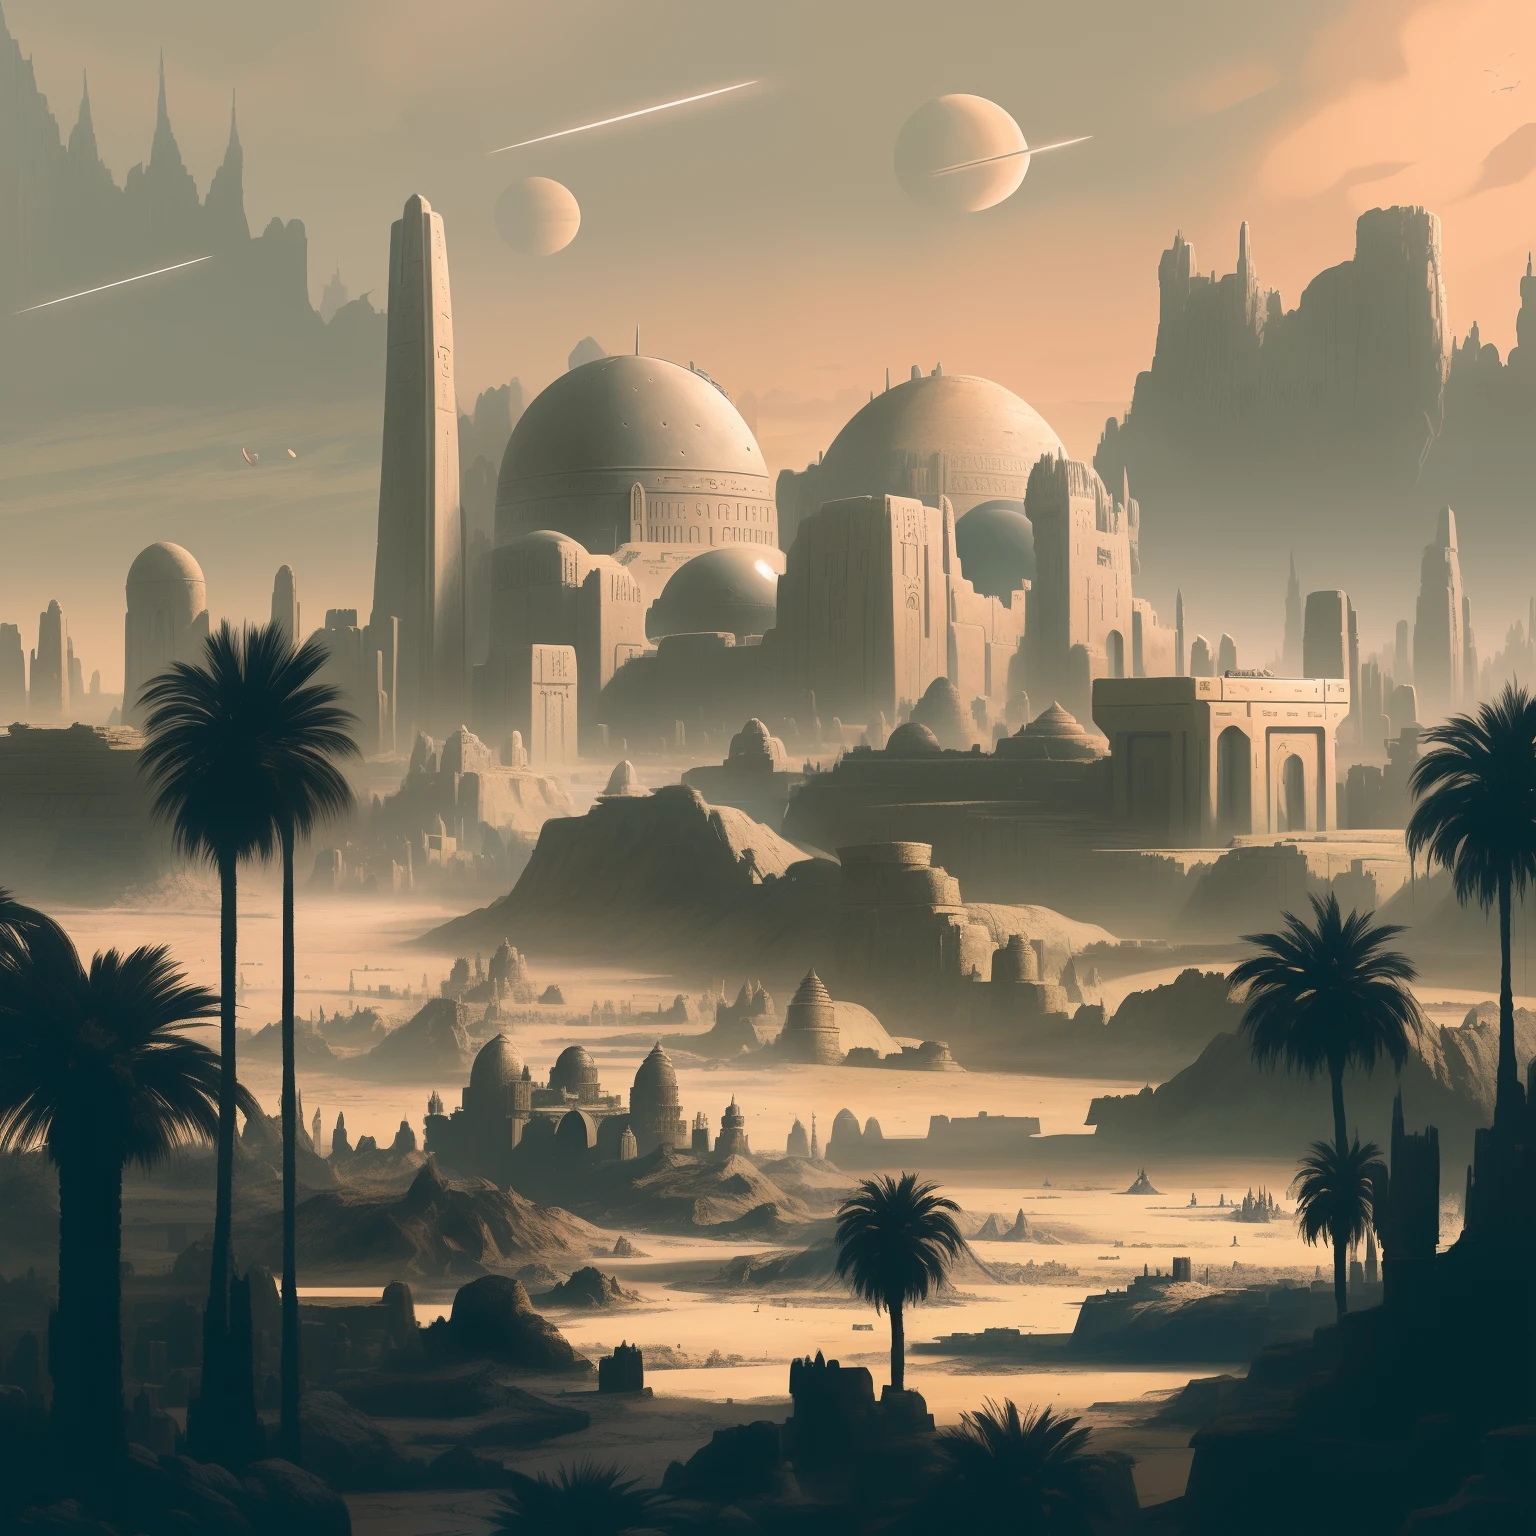 arafed view of a city with a spaceship flying over it, ancient sci - fi city, andreas rocha style, desert city, dune city and temples of arrakis, imperial city in the distance, in fantasy sci - fi city, city in desert, holy city | illustration, inspired by Andreas Rocha, ancient city landscape, naboo